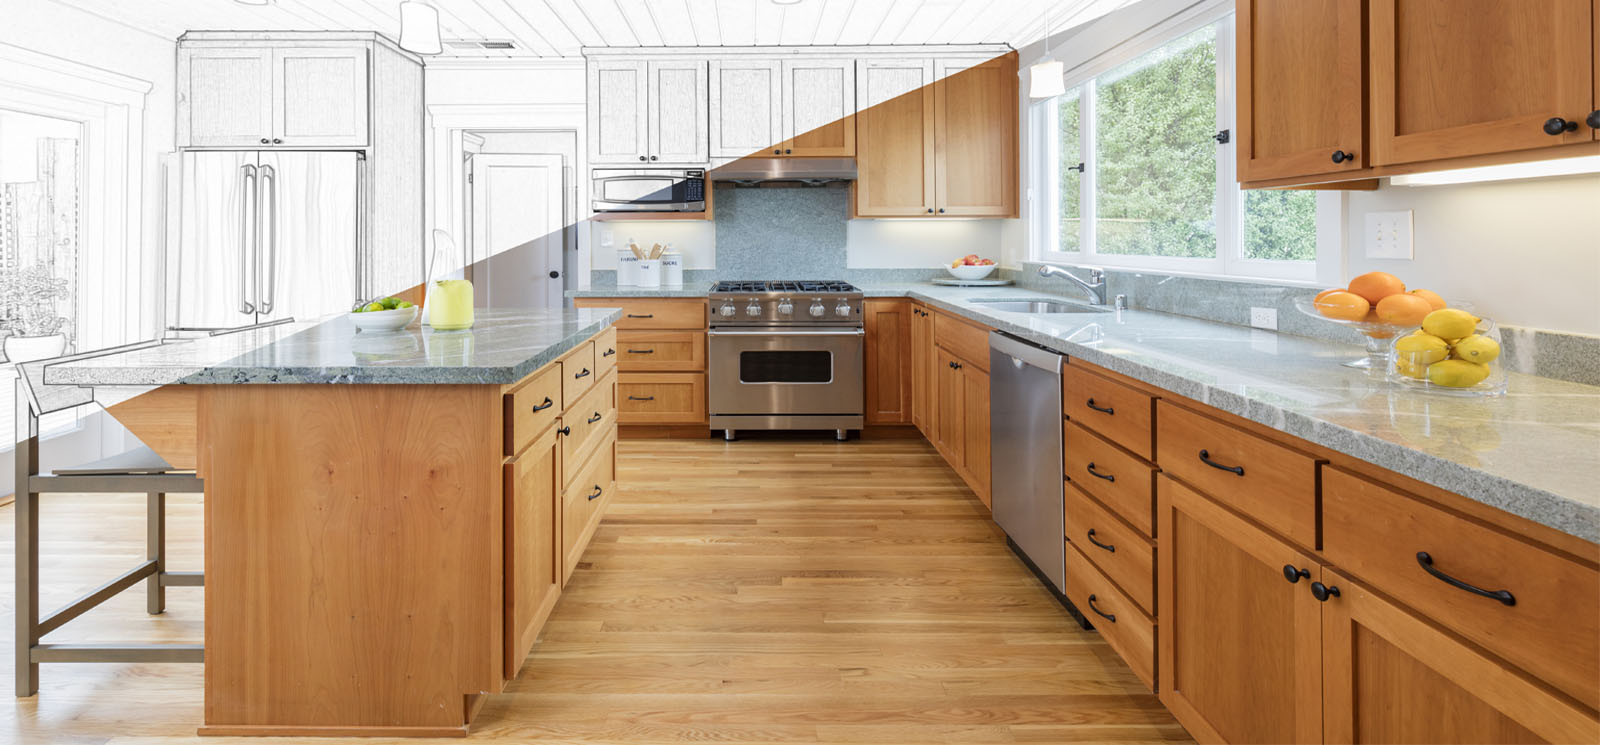 Image shows a remodeled kitchen in a home.